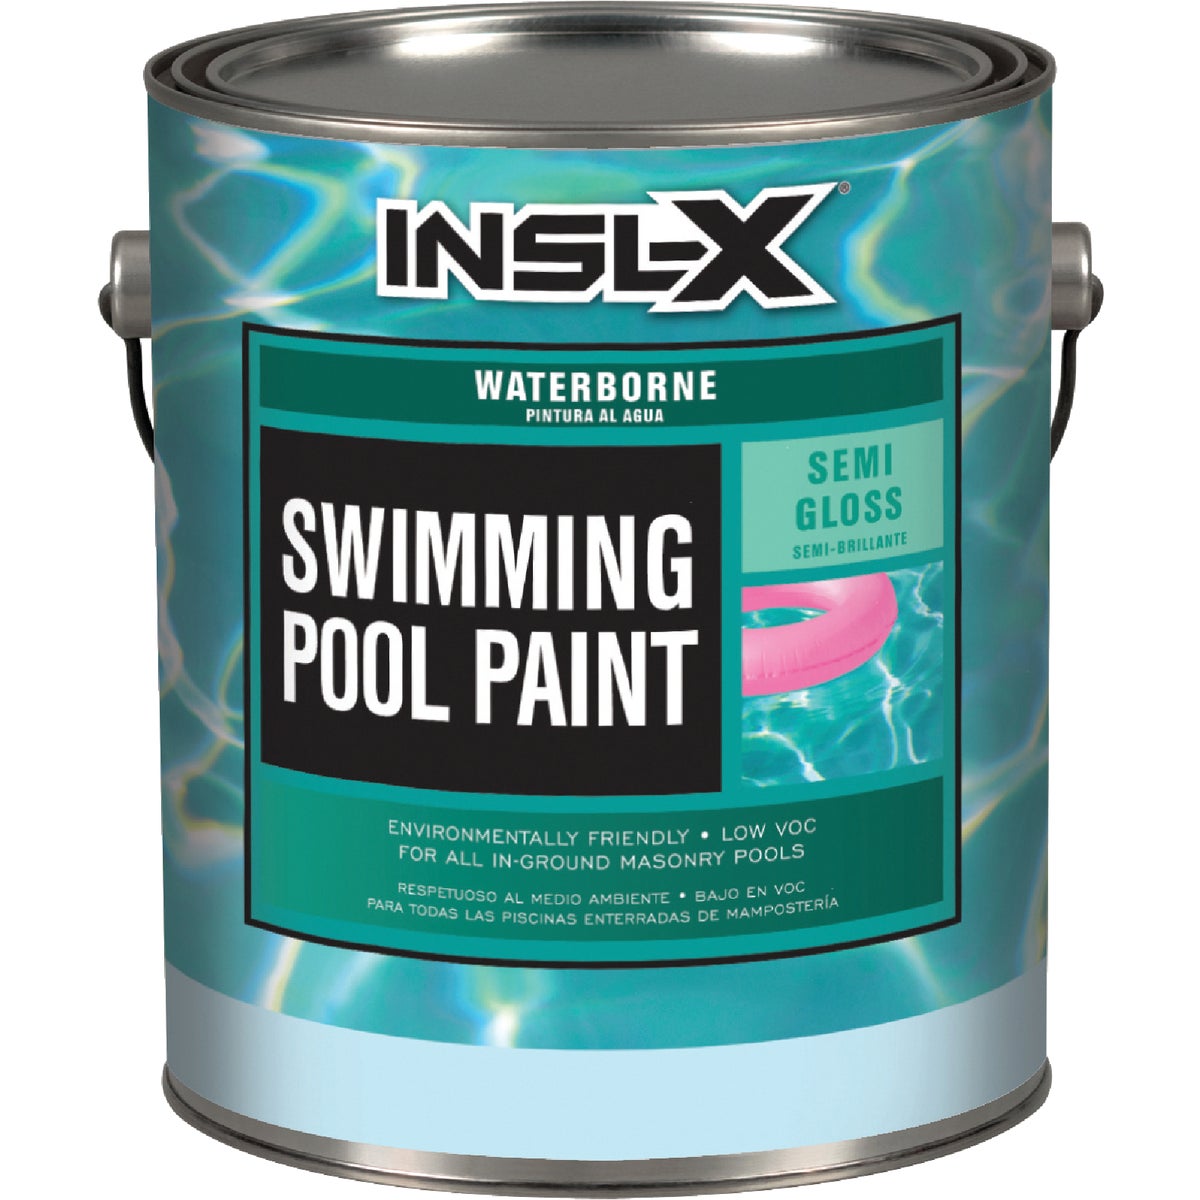 Item 781643, A new generation of waterborne, acrylic emulsion self-priming pool paint 